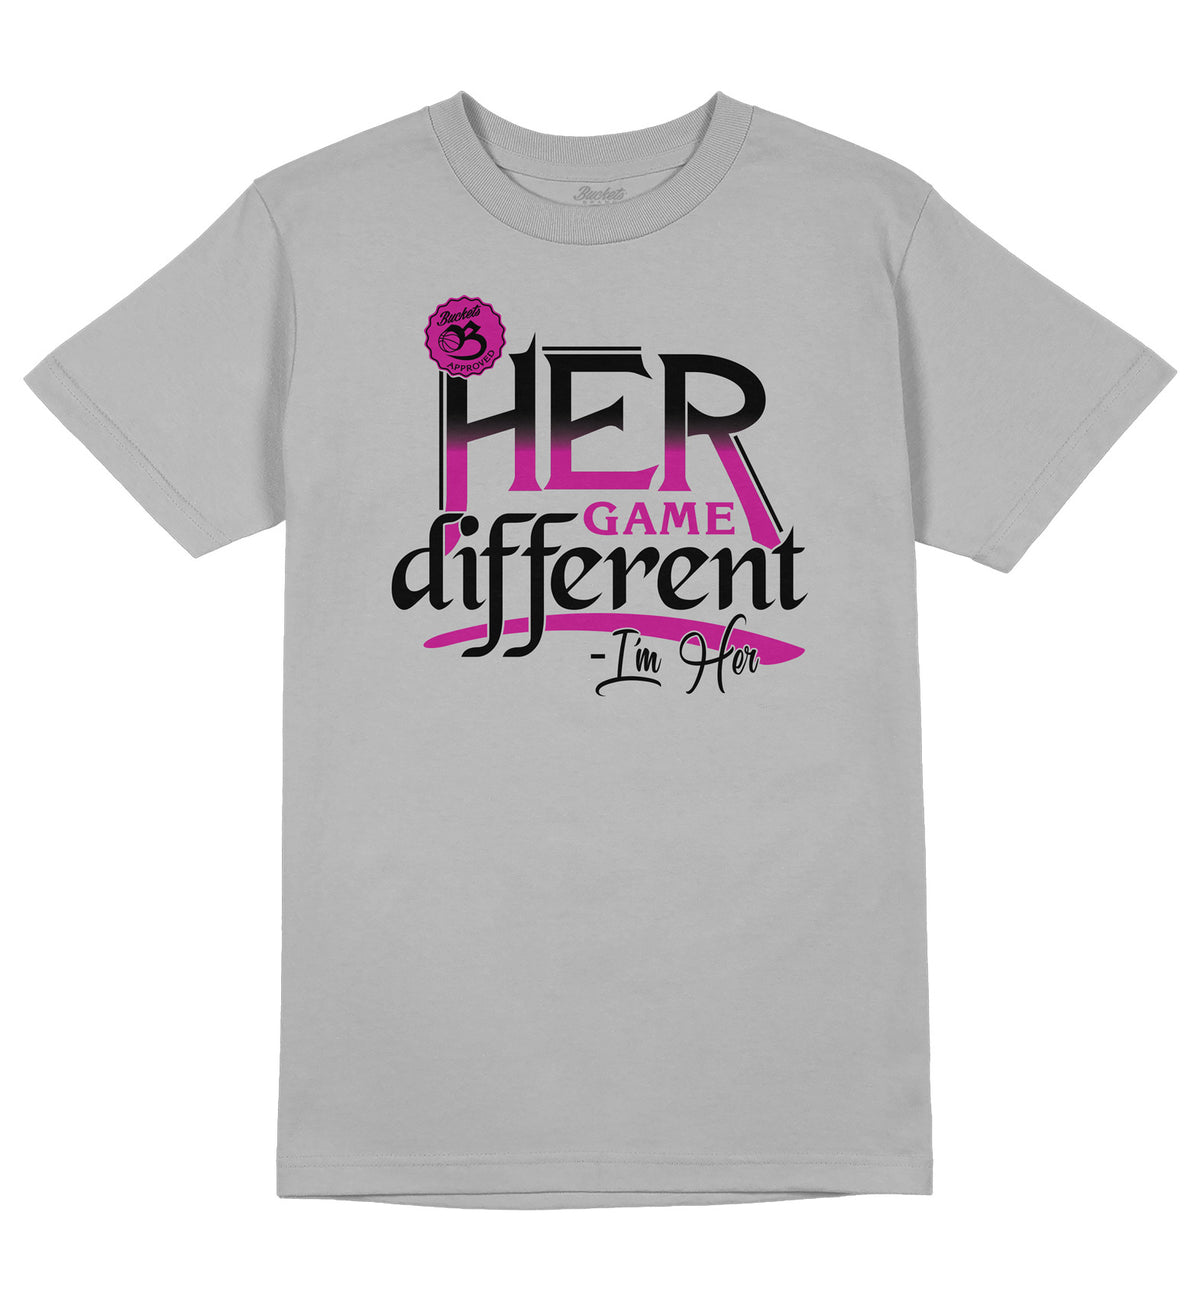 Her Game Different Tee - Silver